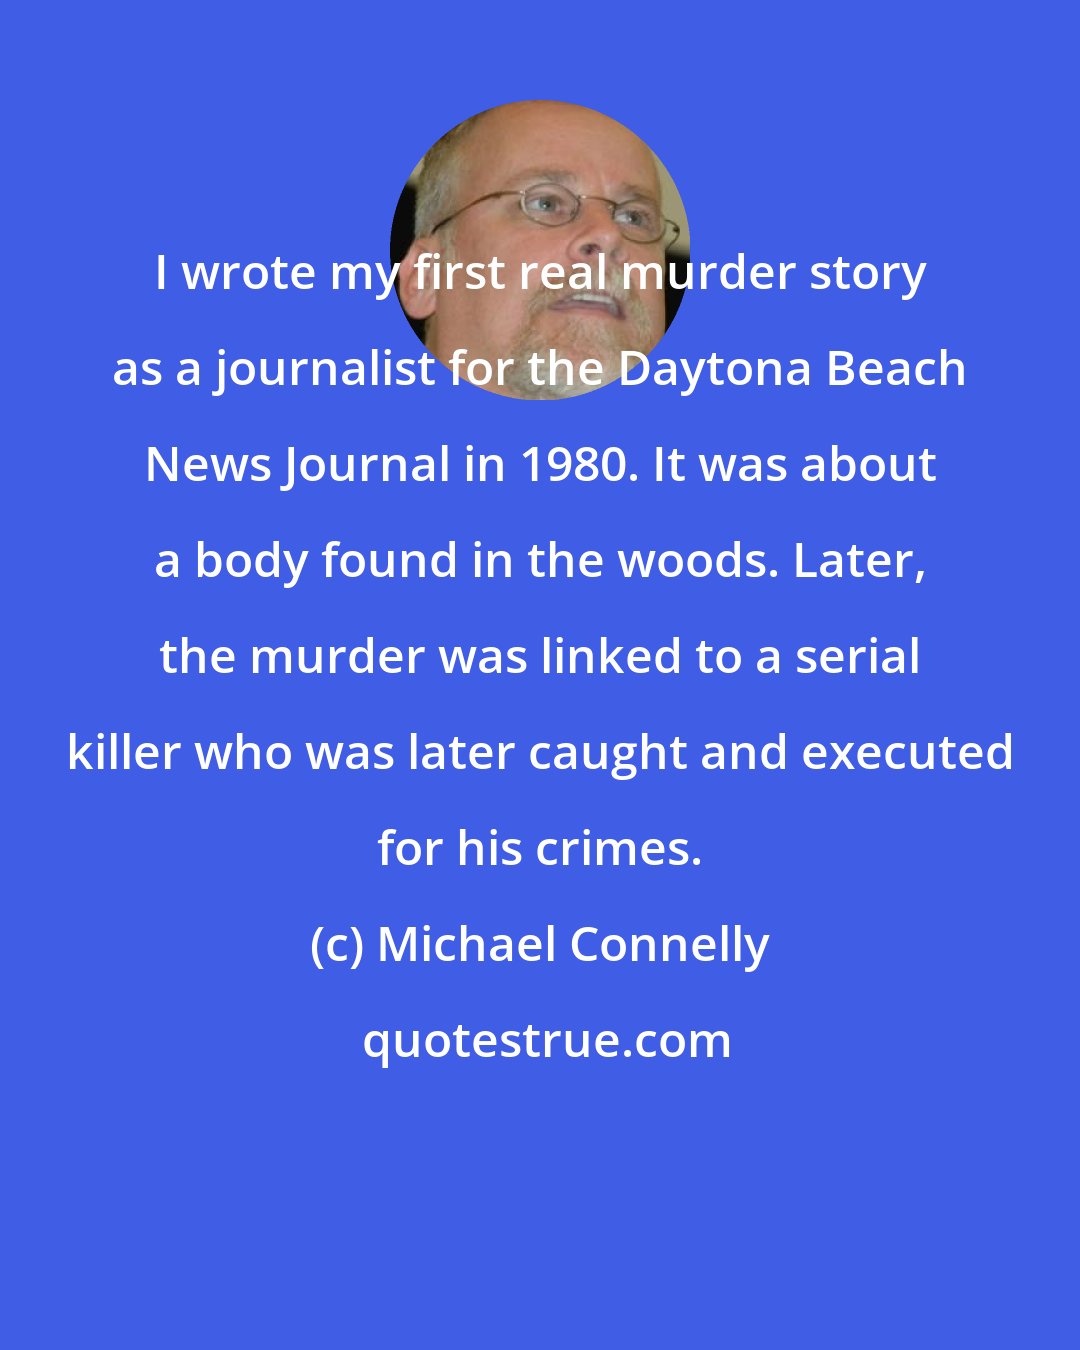 Michael Connelly: I wrote my first real murder story as a journalist for the Daytona Beach News Journal in 1980. It was about a body found in the woods. Later, the murder was linked to a serial killer who was later caught and executed for his crimes.